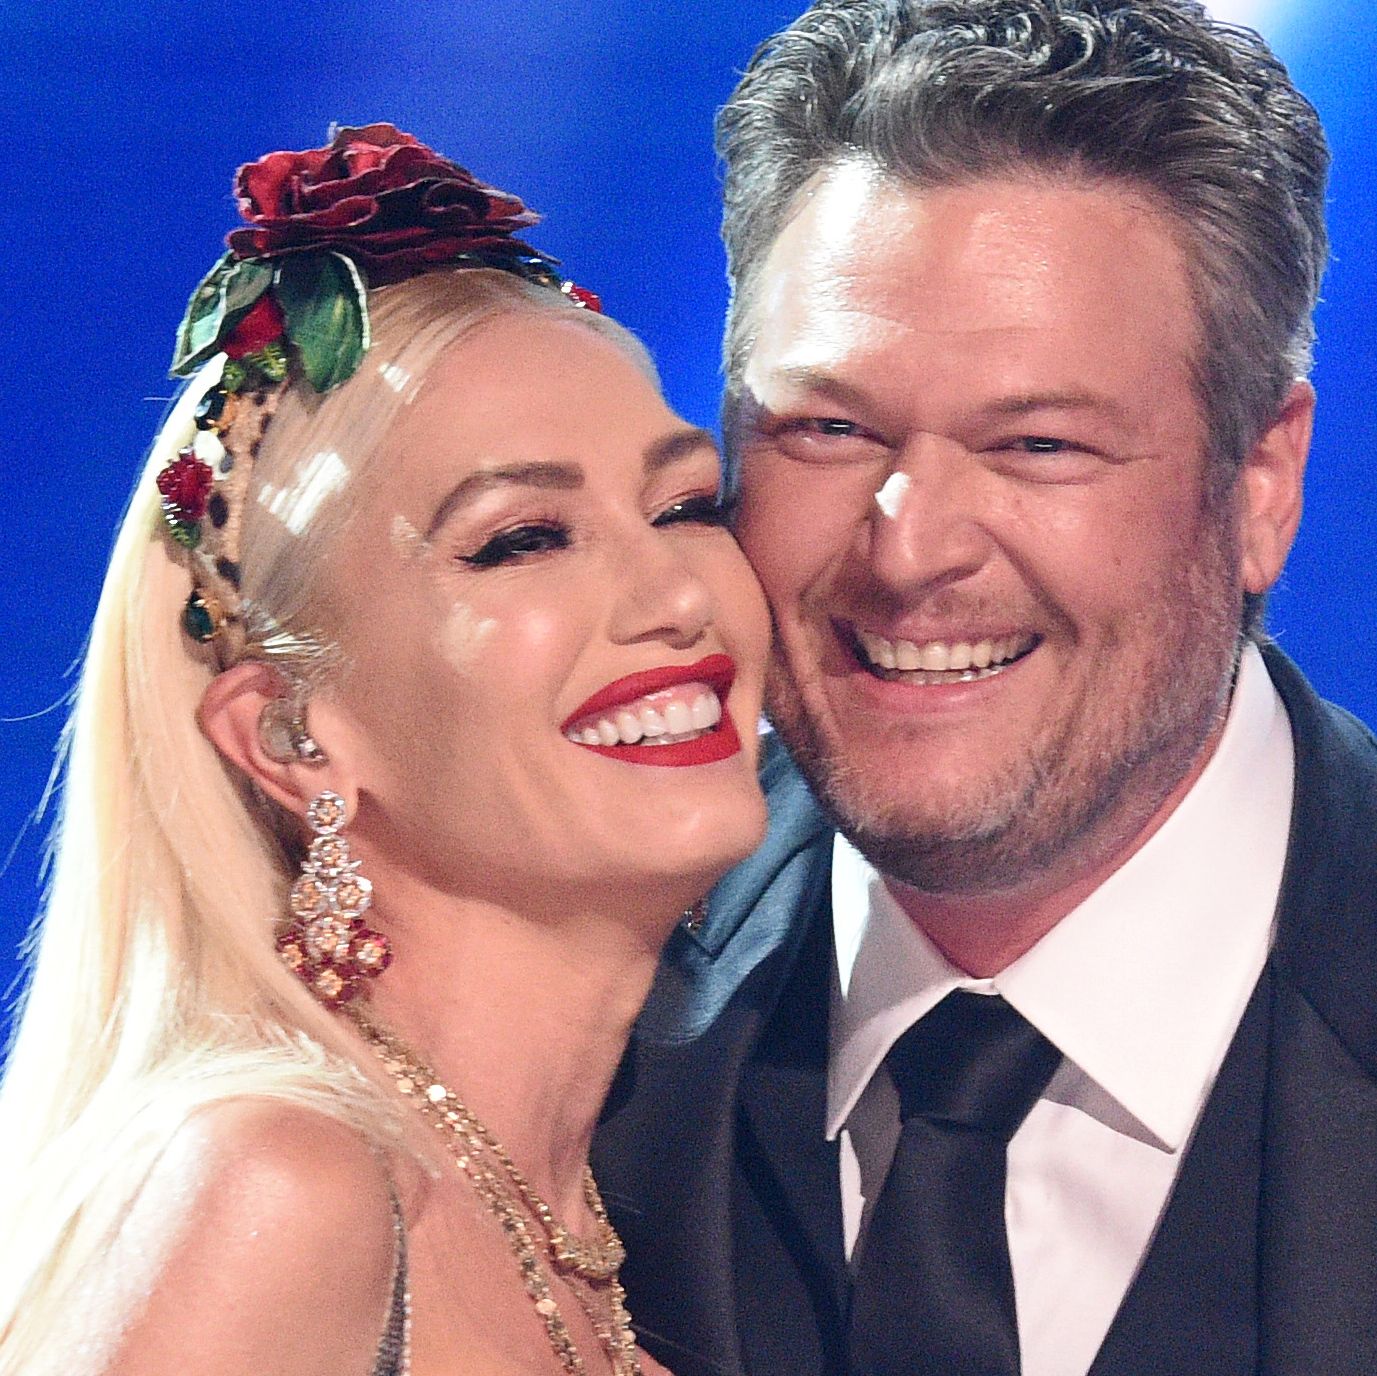 'Voice' Fans Are Shrieking Over Blake Shelton and Gwen Stefani's Intimate IG Video